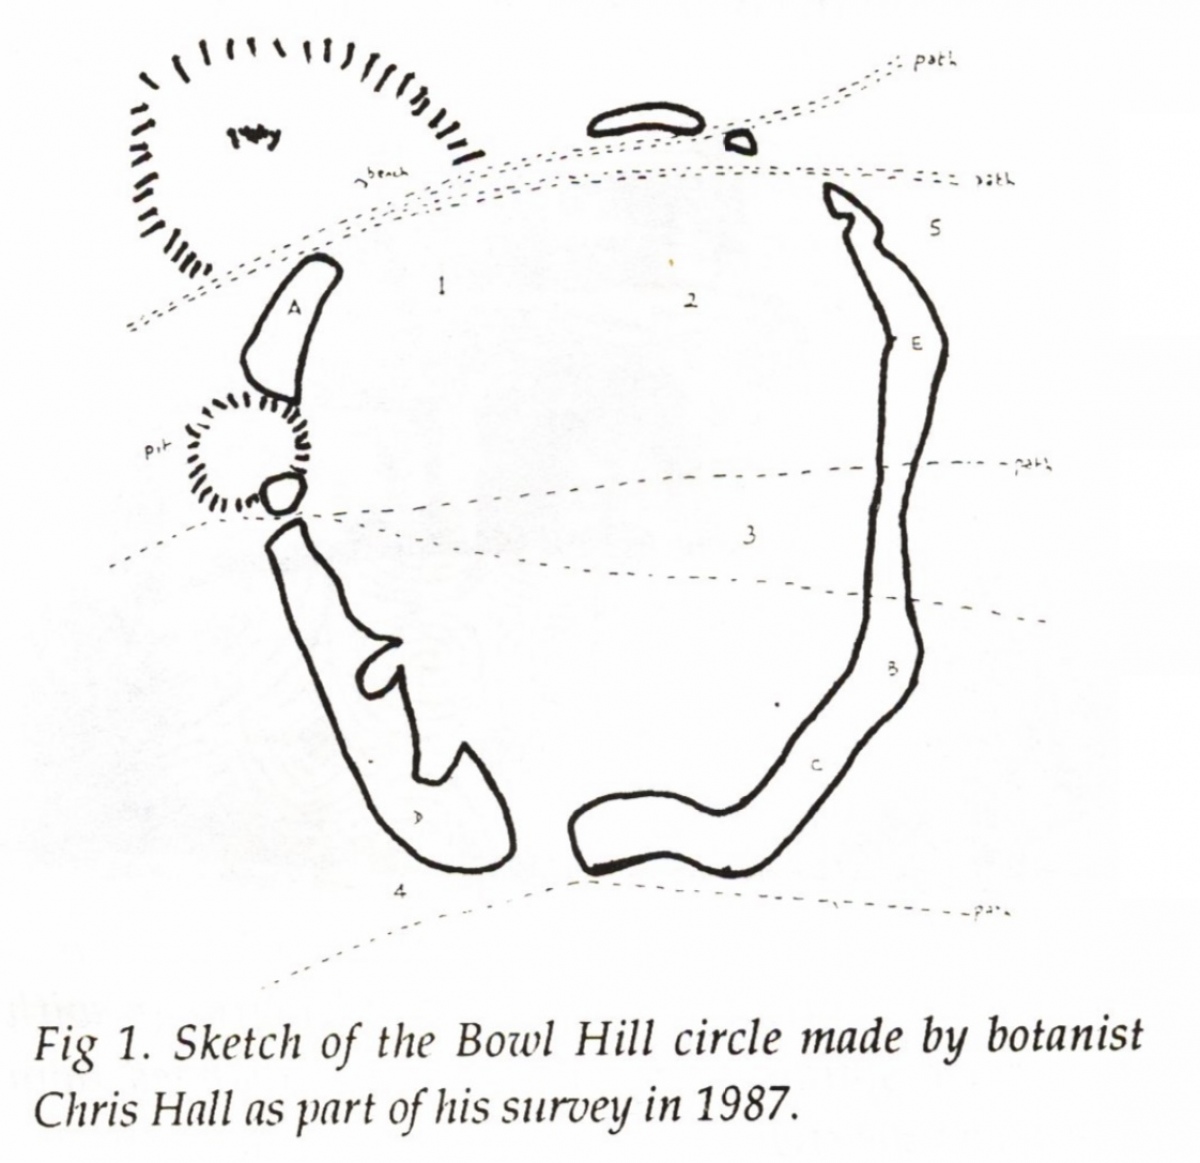 Sketch of the Bowl Hill circle made by botanist
Chris Hall as part of his survey in 1987.